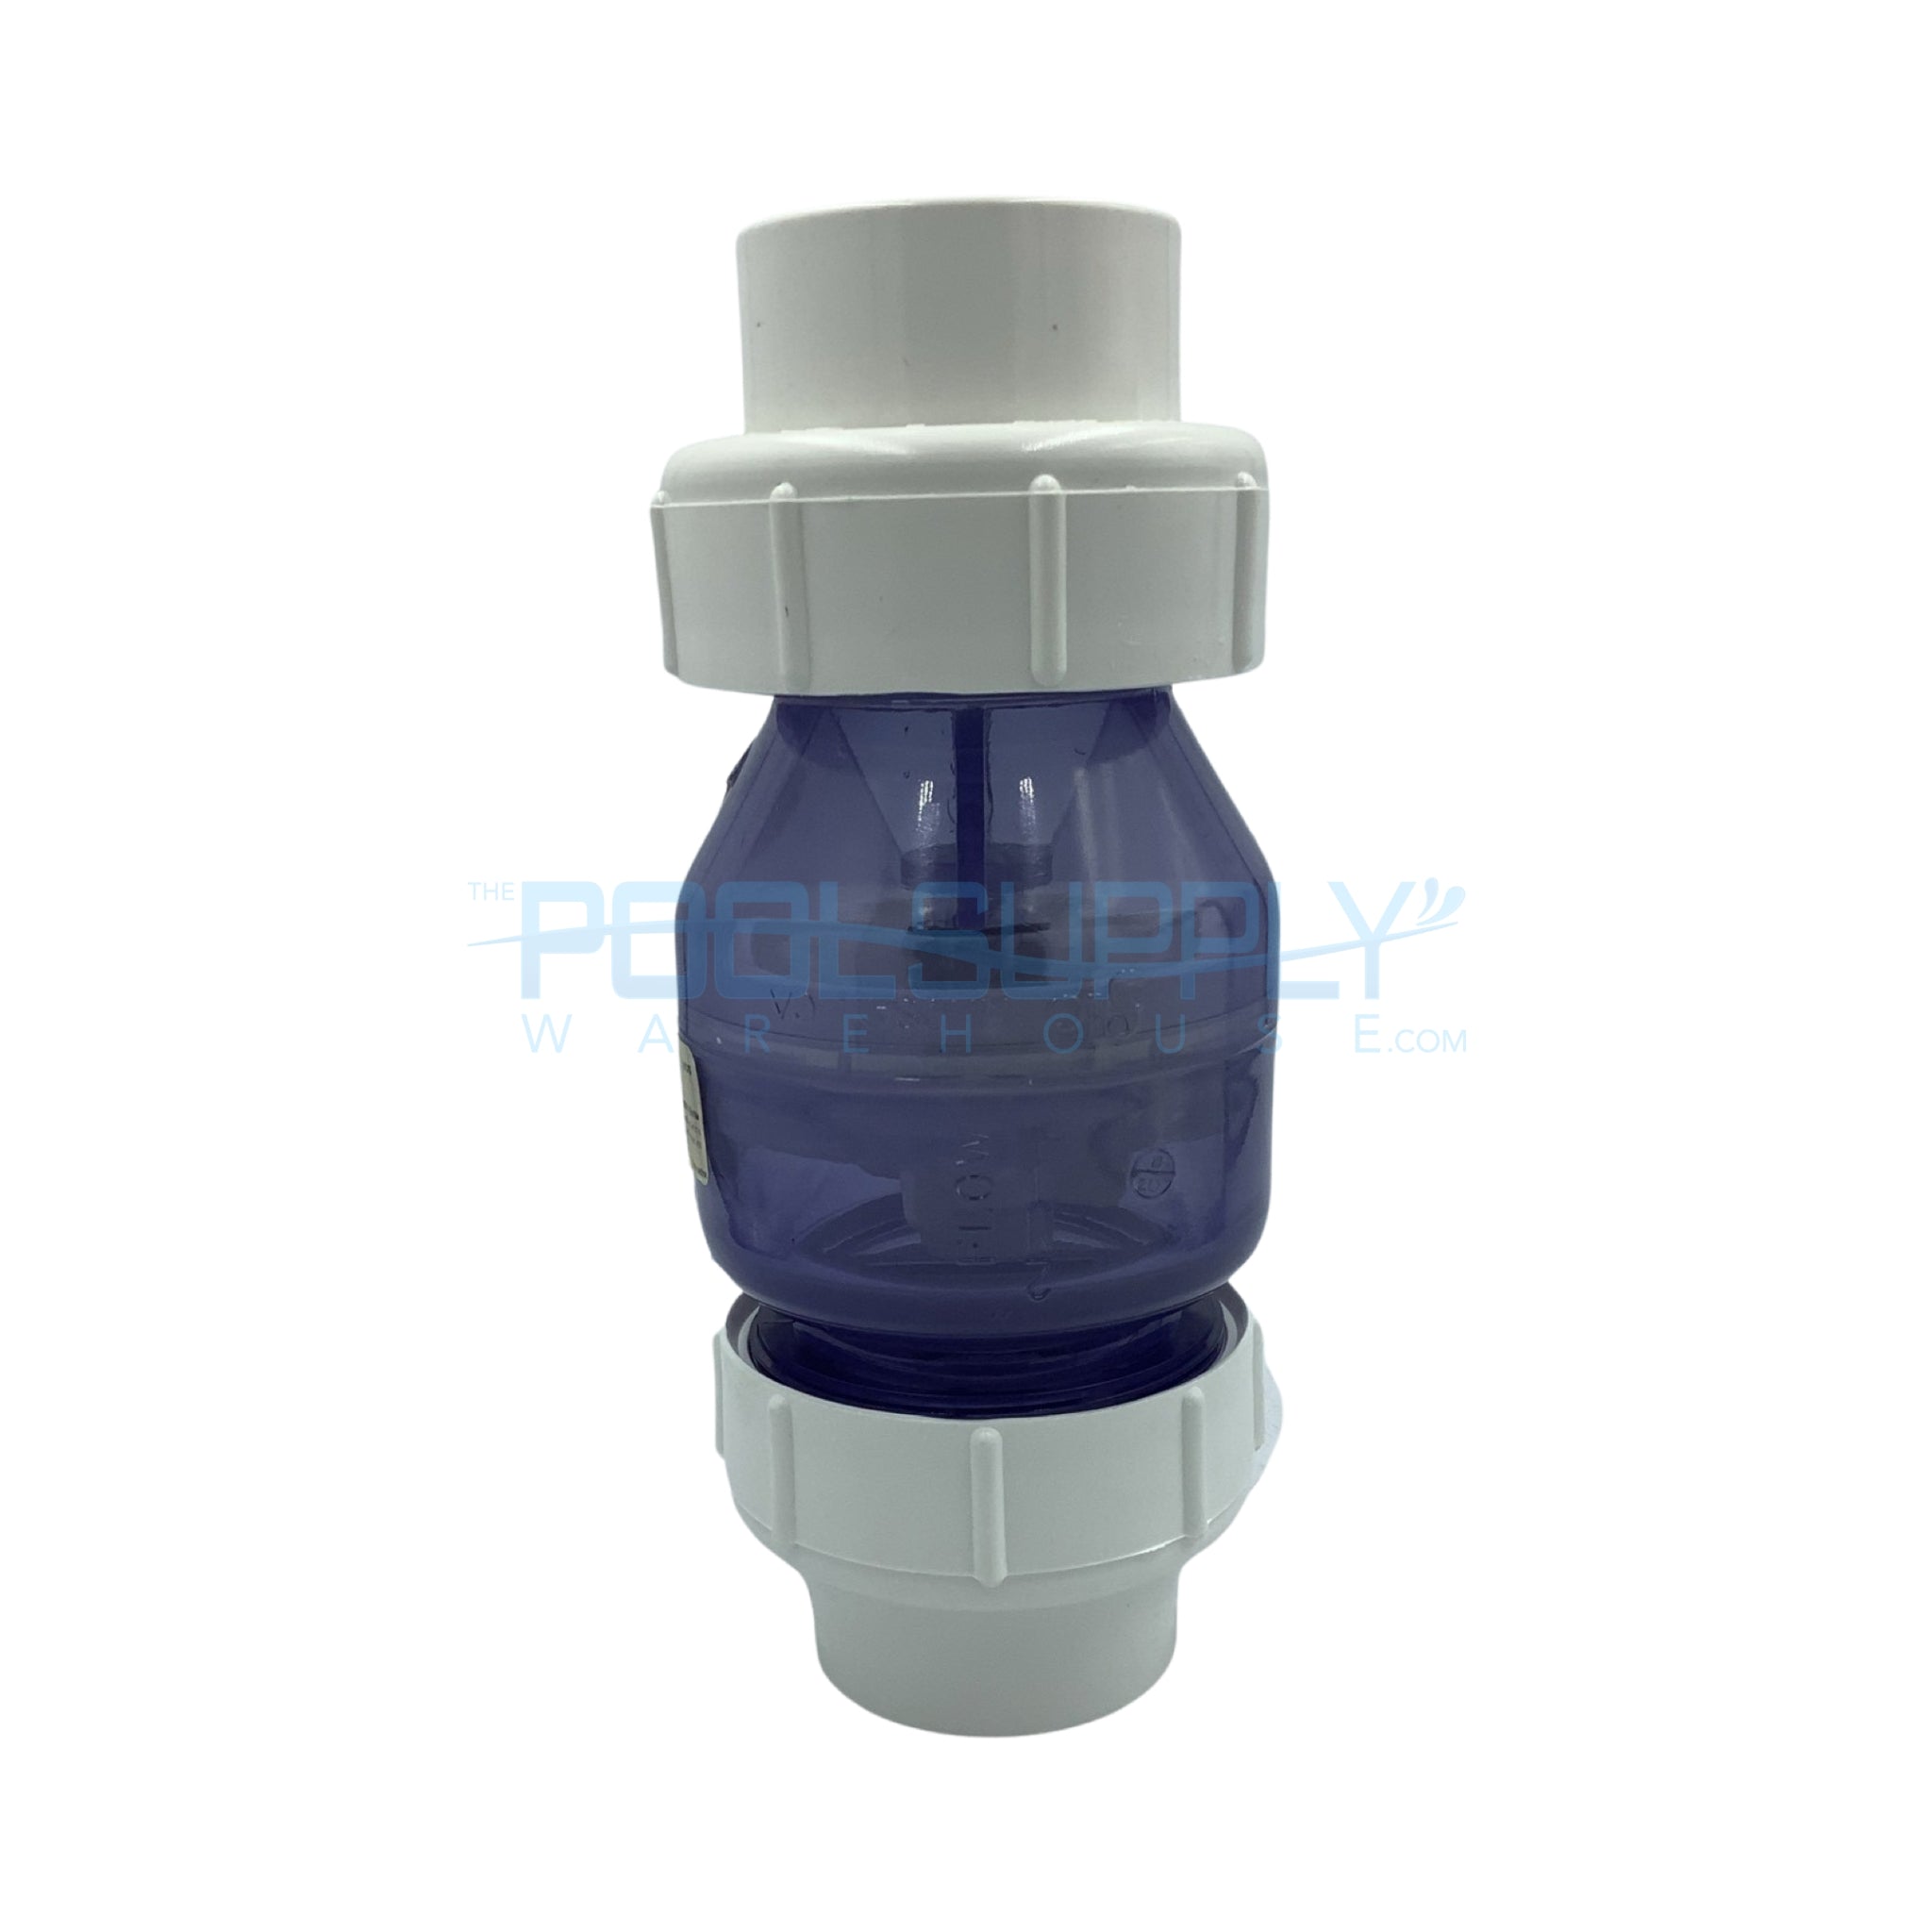 NDS 2" True Union Spring Check Valve, Clear - 1700C20 - The Pool Supply Warehouse